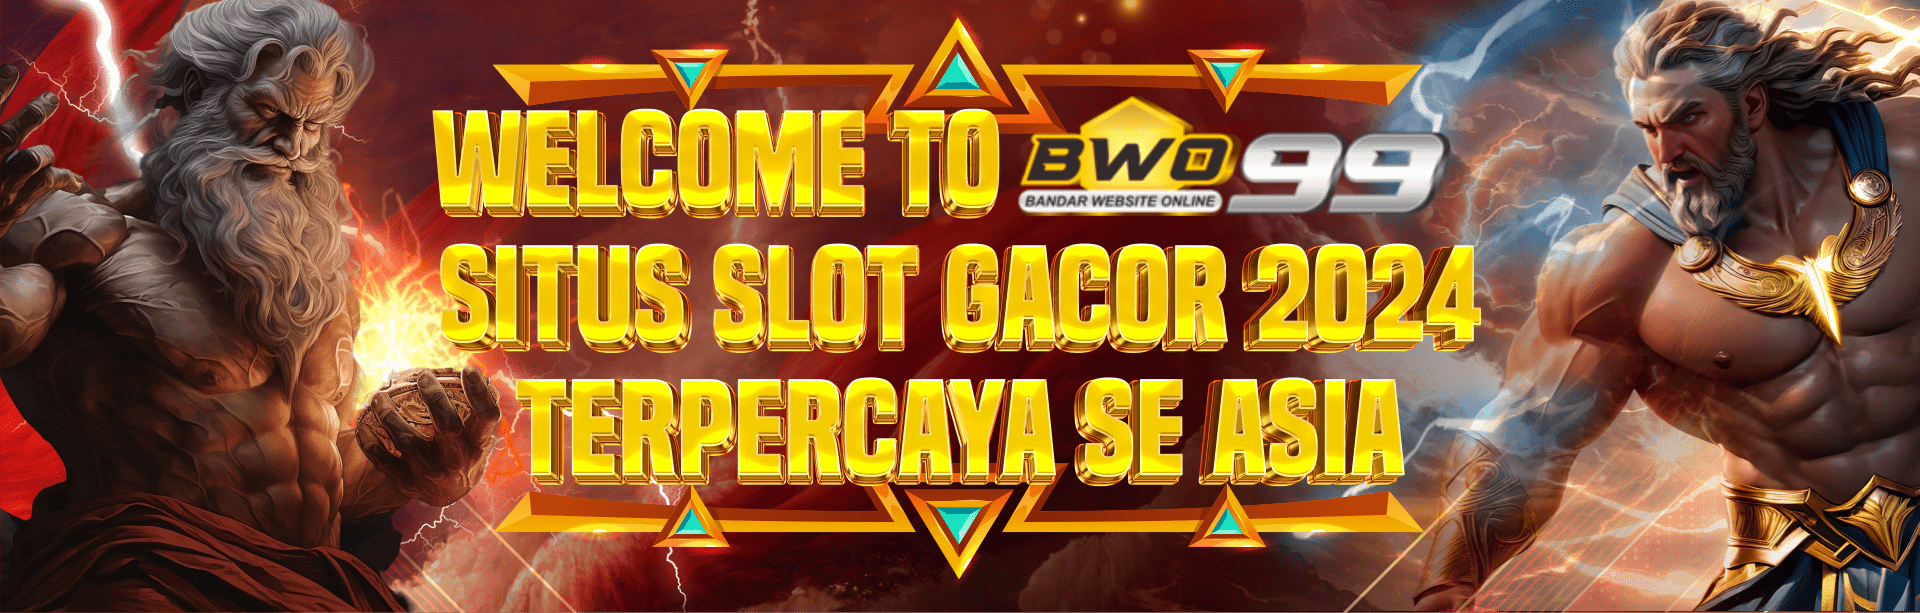 Welcome banner BWO99 2024